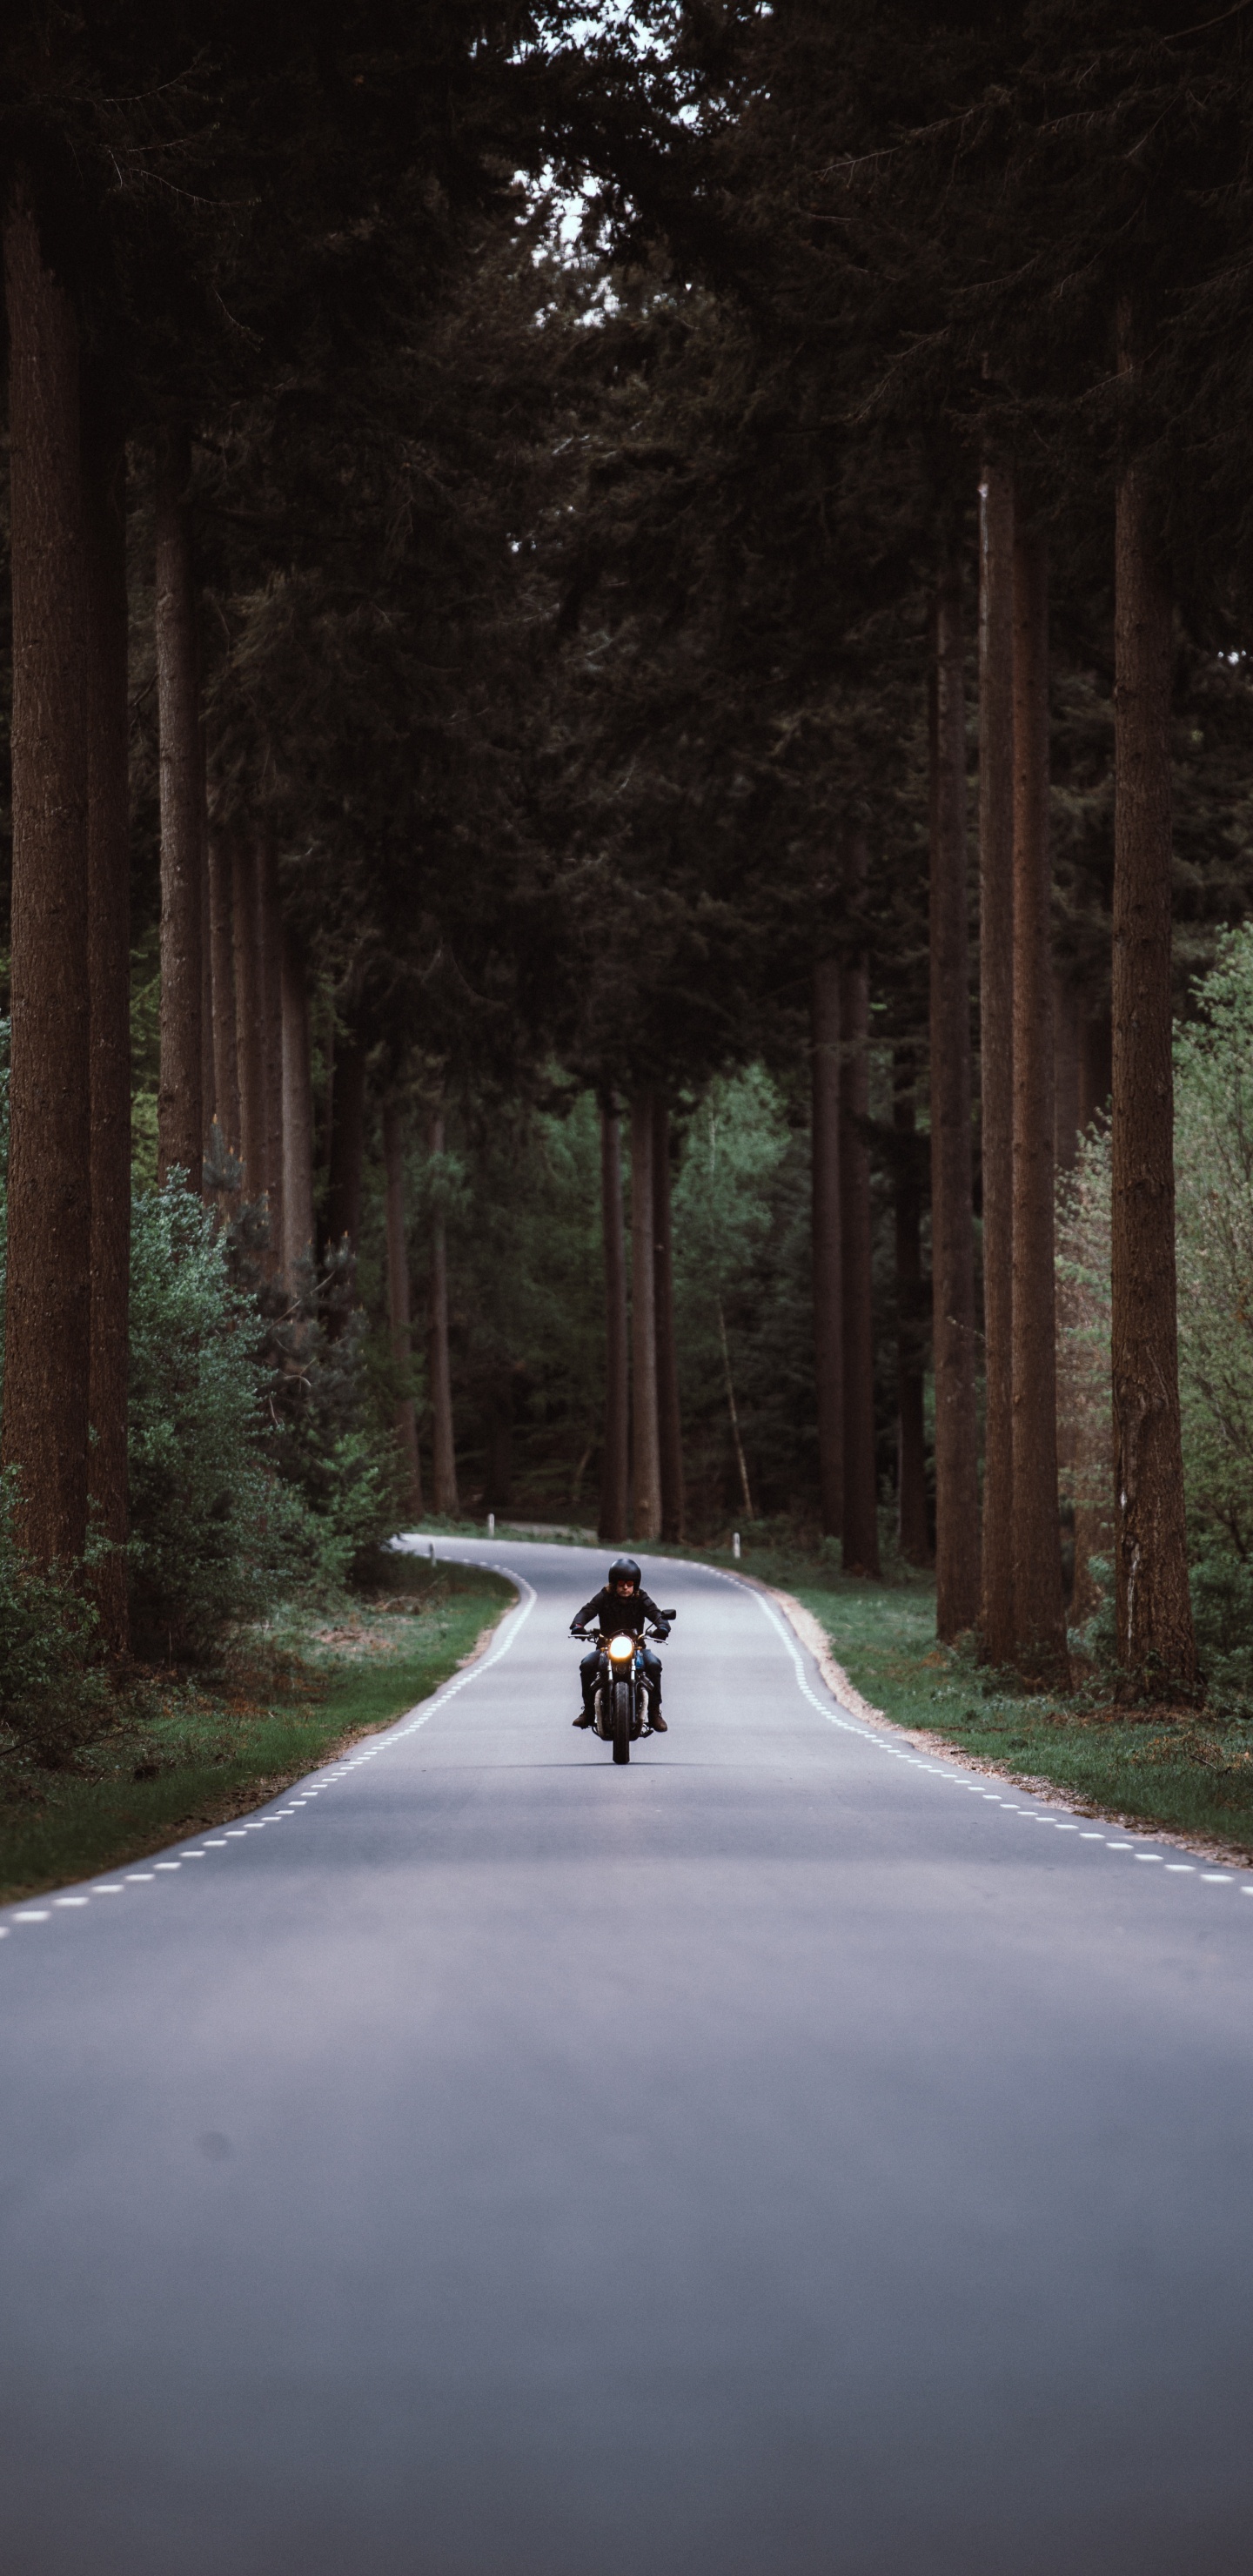 Person Riding Motorcycle on Road Between Trees During Daytime. Wallpaper in 1440x2960 Resolution